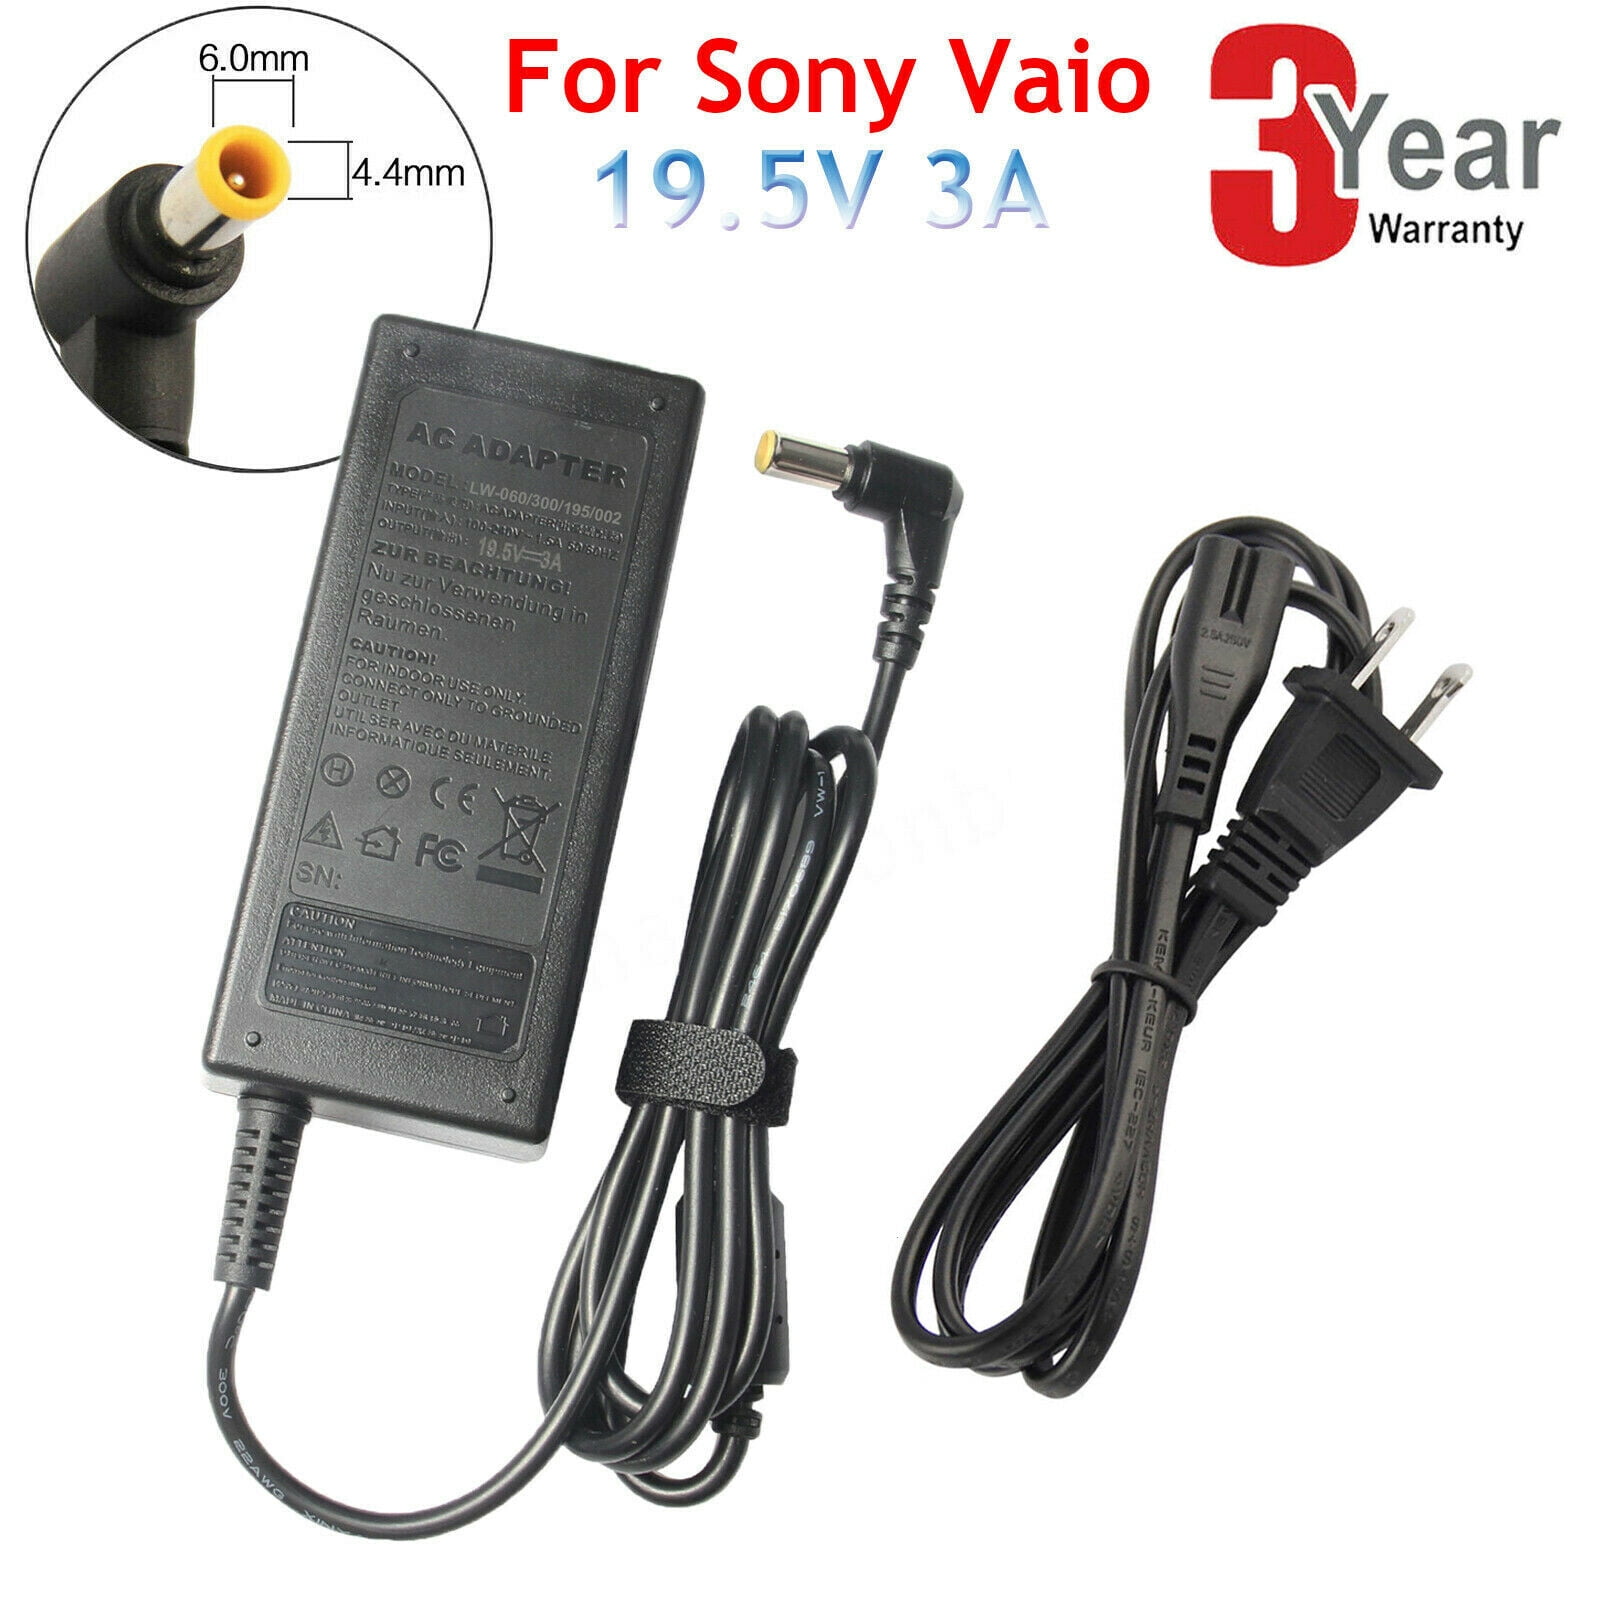 AC Adapter Charger Power Supply Cord For Sony Vaio Laptop Notebook PC 19.5V 16V 